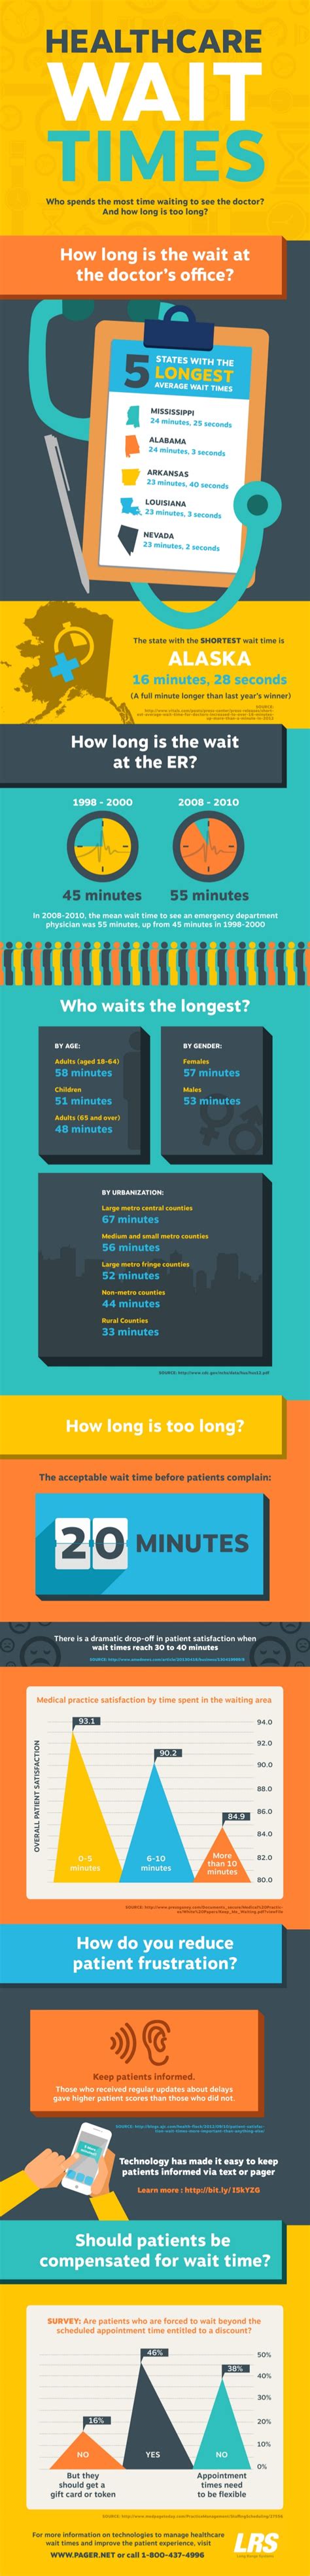 Healthcare Wait Times Infographic Health Care Wait Times Infographic